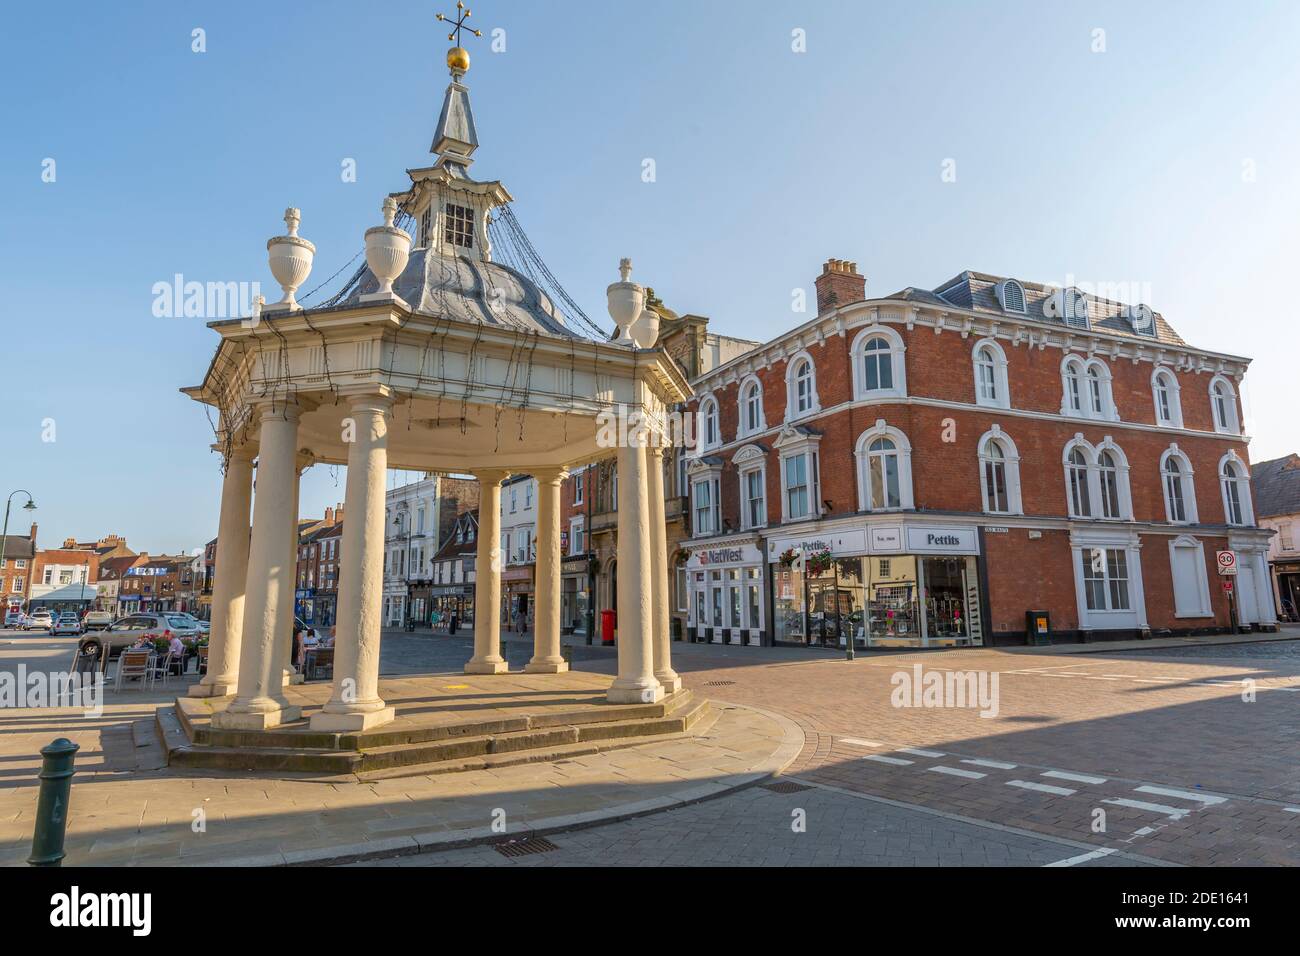 View of the Bandstand in the Market Square, Beverley, North Humberside, East Yorkshire, England, United Kingdom, Europe Stock Photo